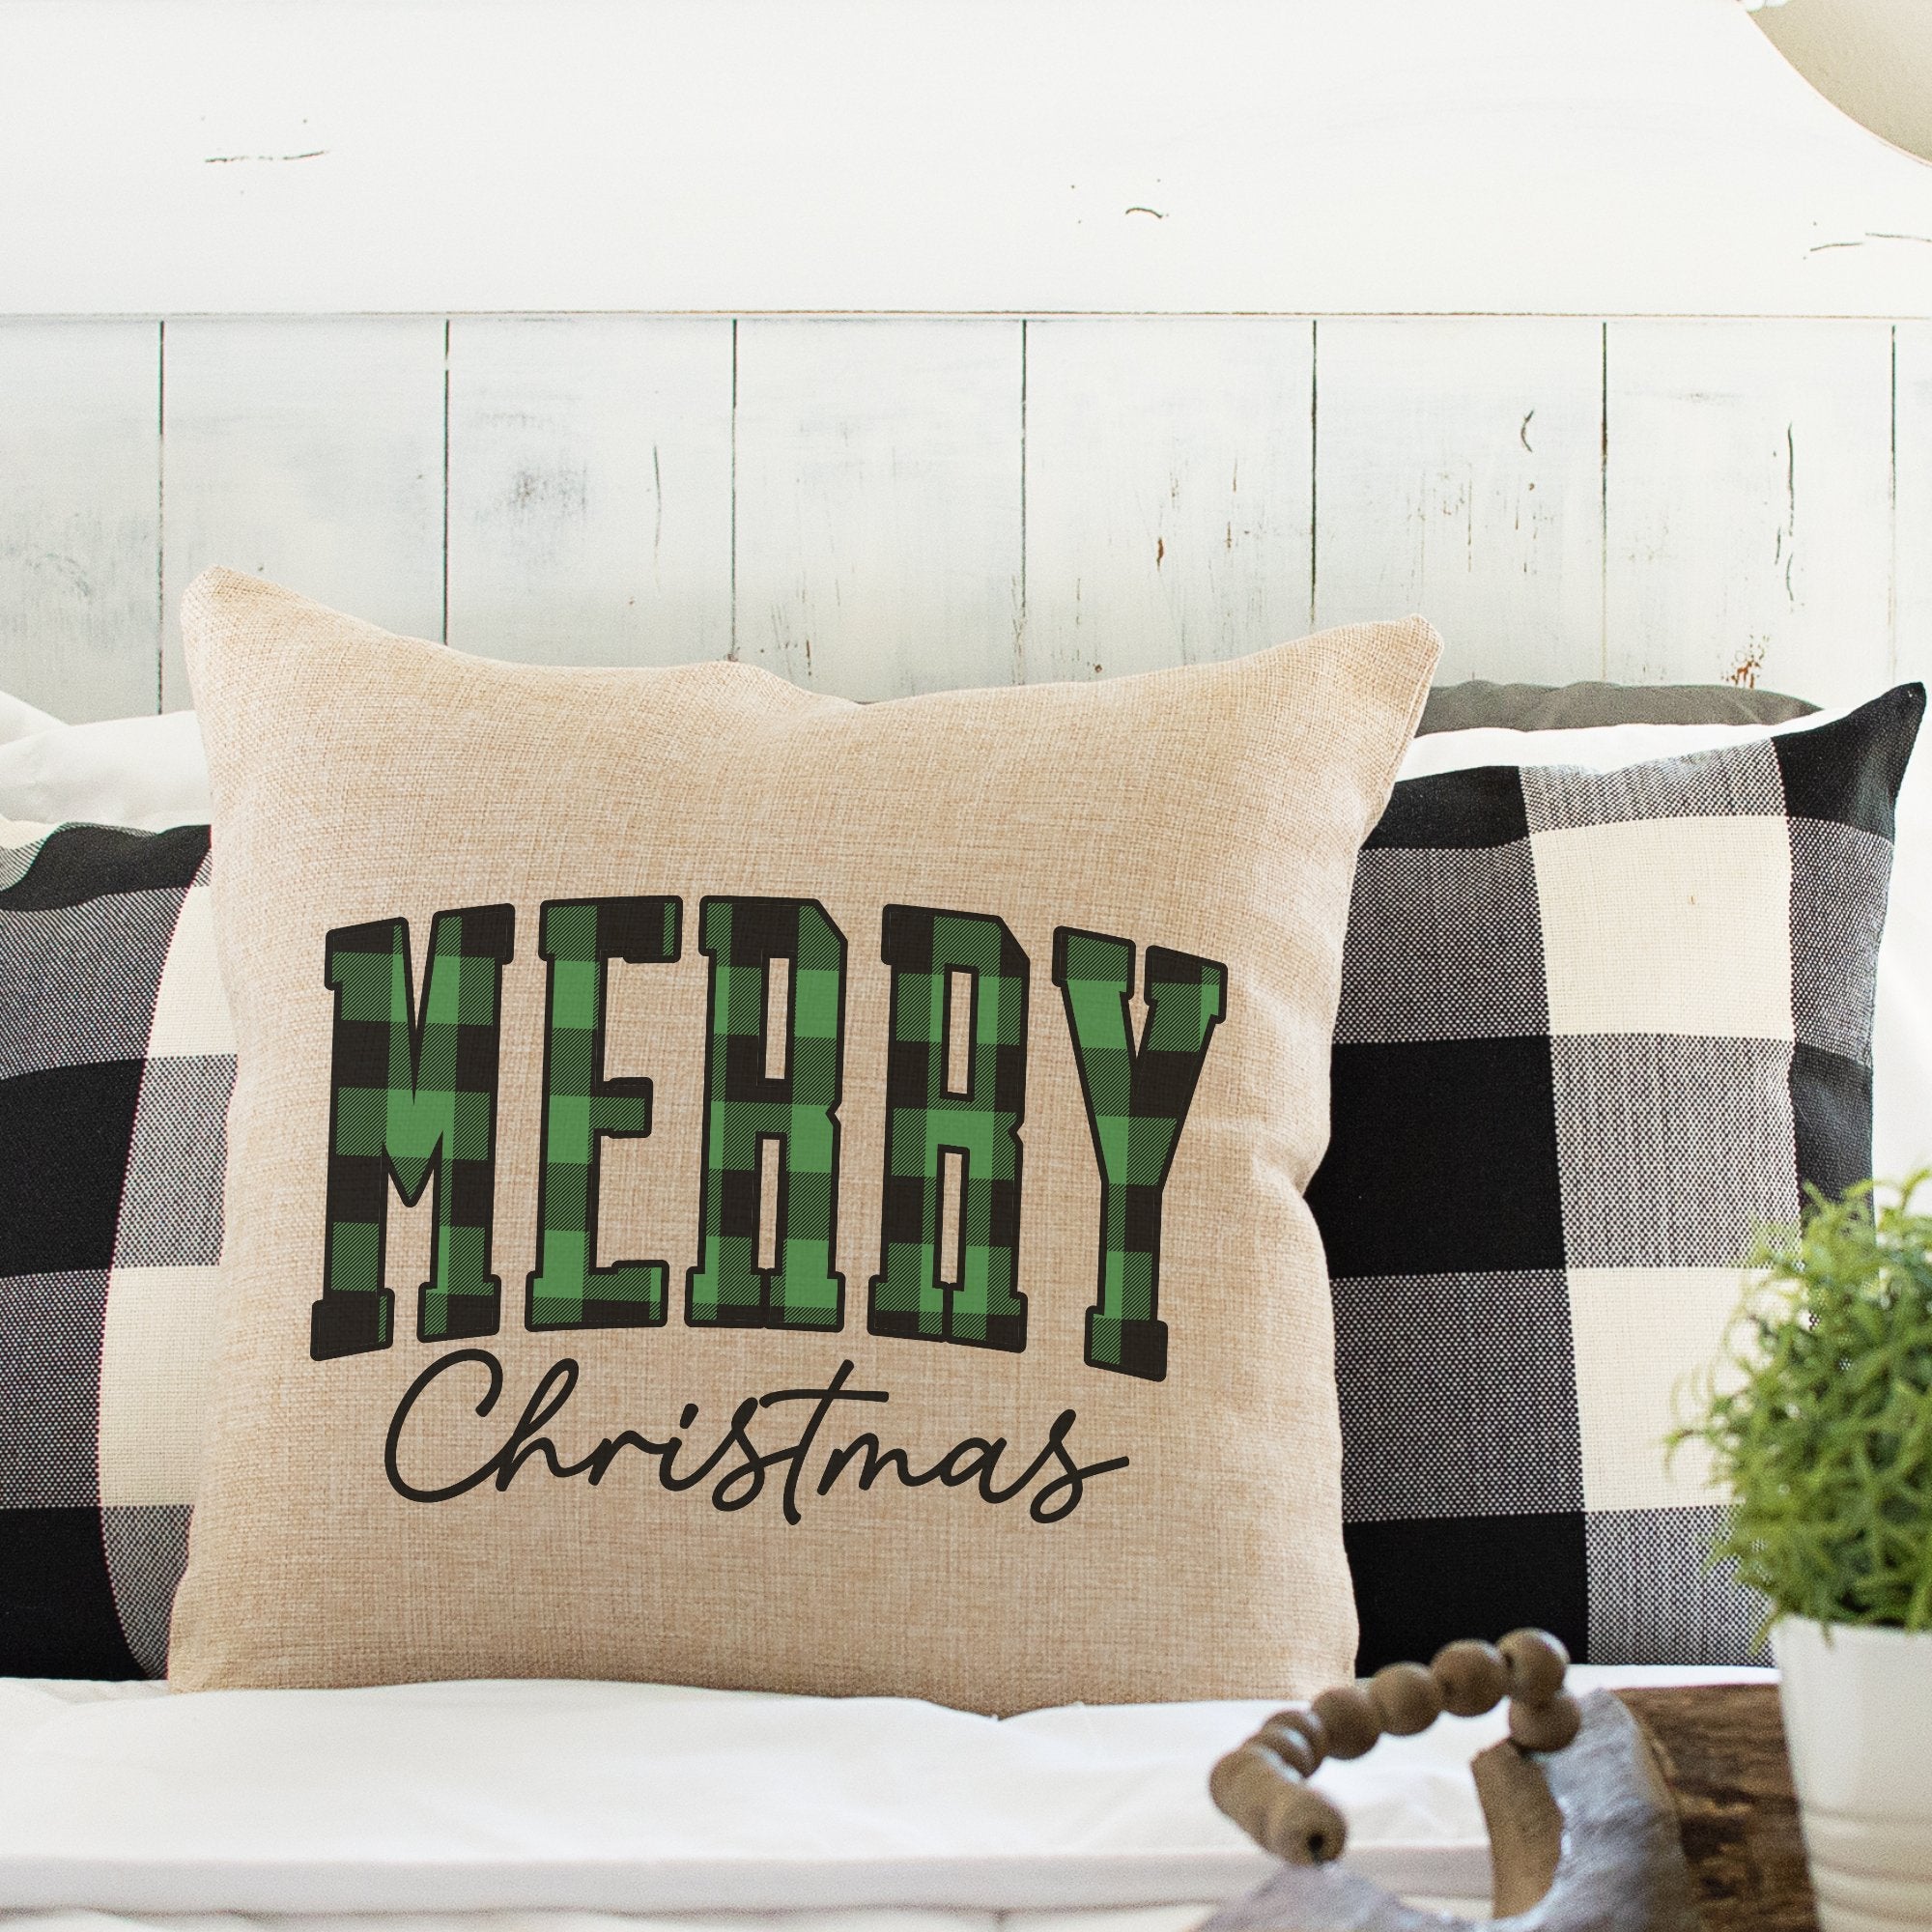 Green Plaid Merry Christmas Pillow Cover - Trendznmore